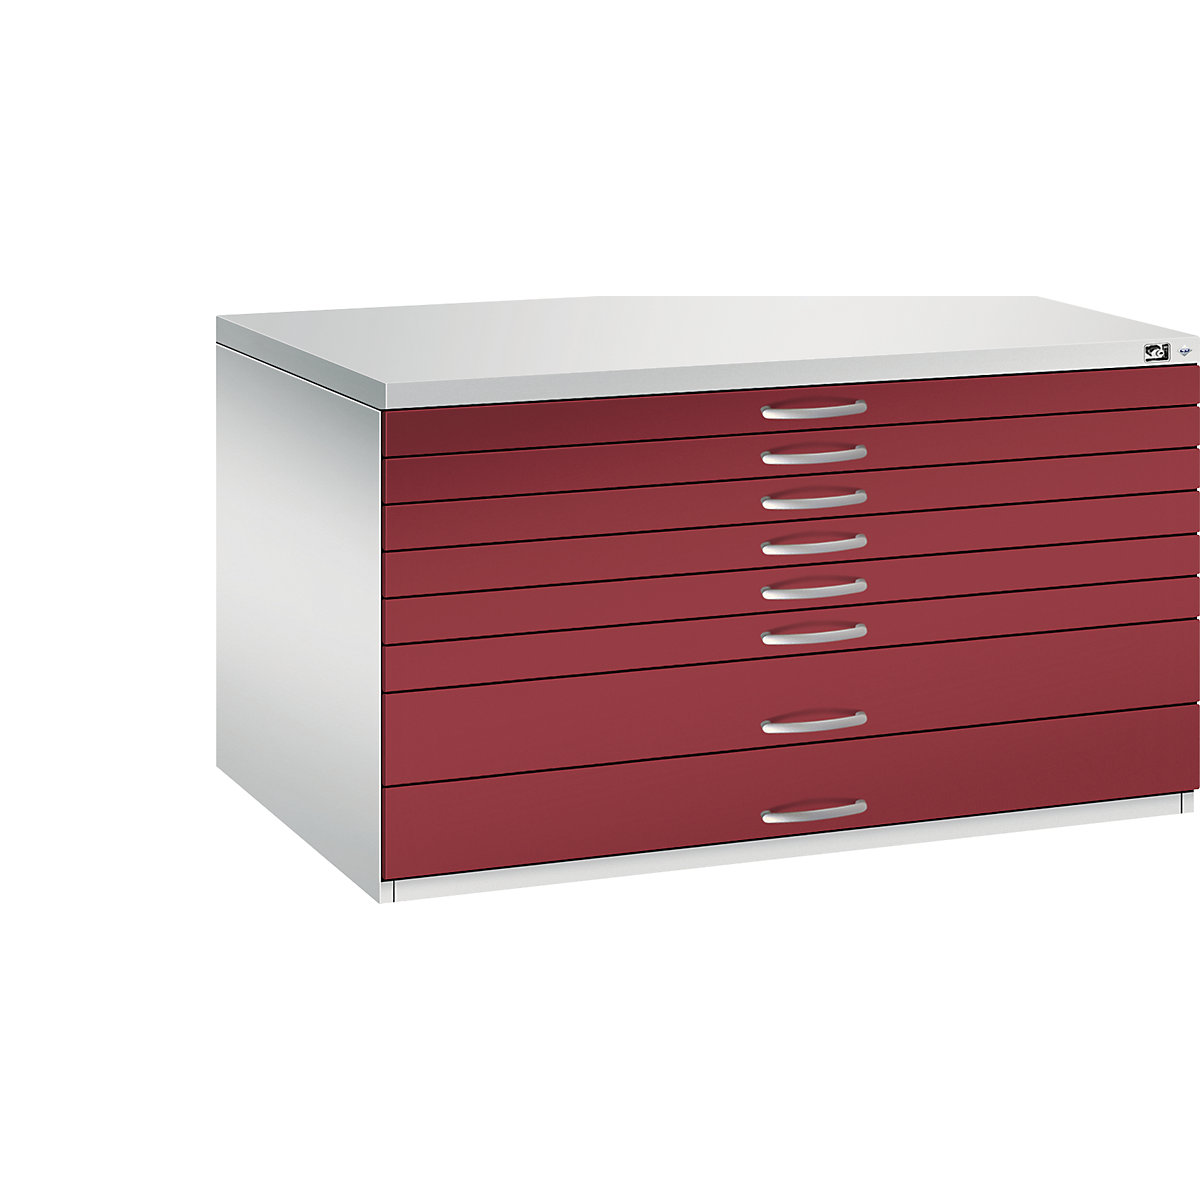 Drawing cabinet – C+P, A0, 8 drawers, height 760 mm, light grey / ruby red-18